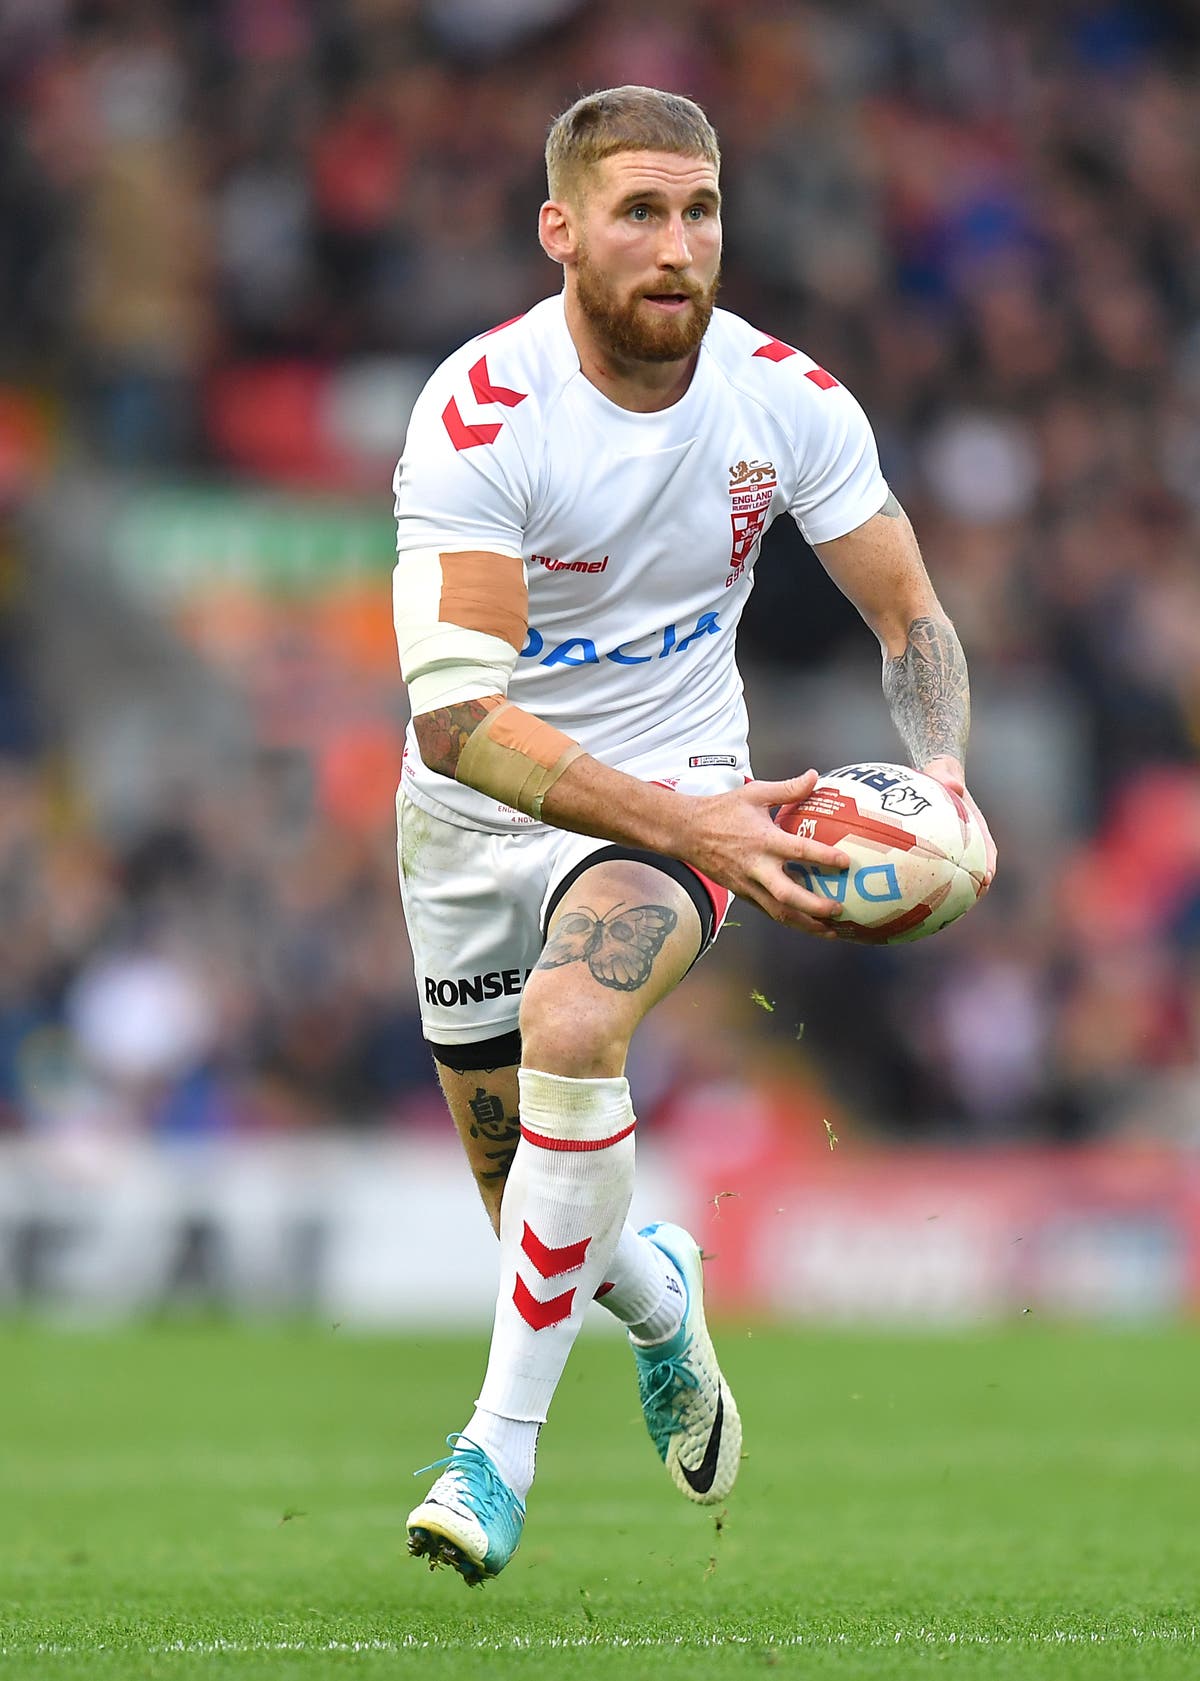 New England captain Sam Tomkins says time at Wigan taught him to be a leader